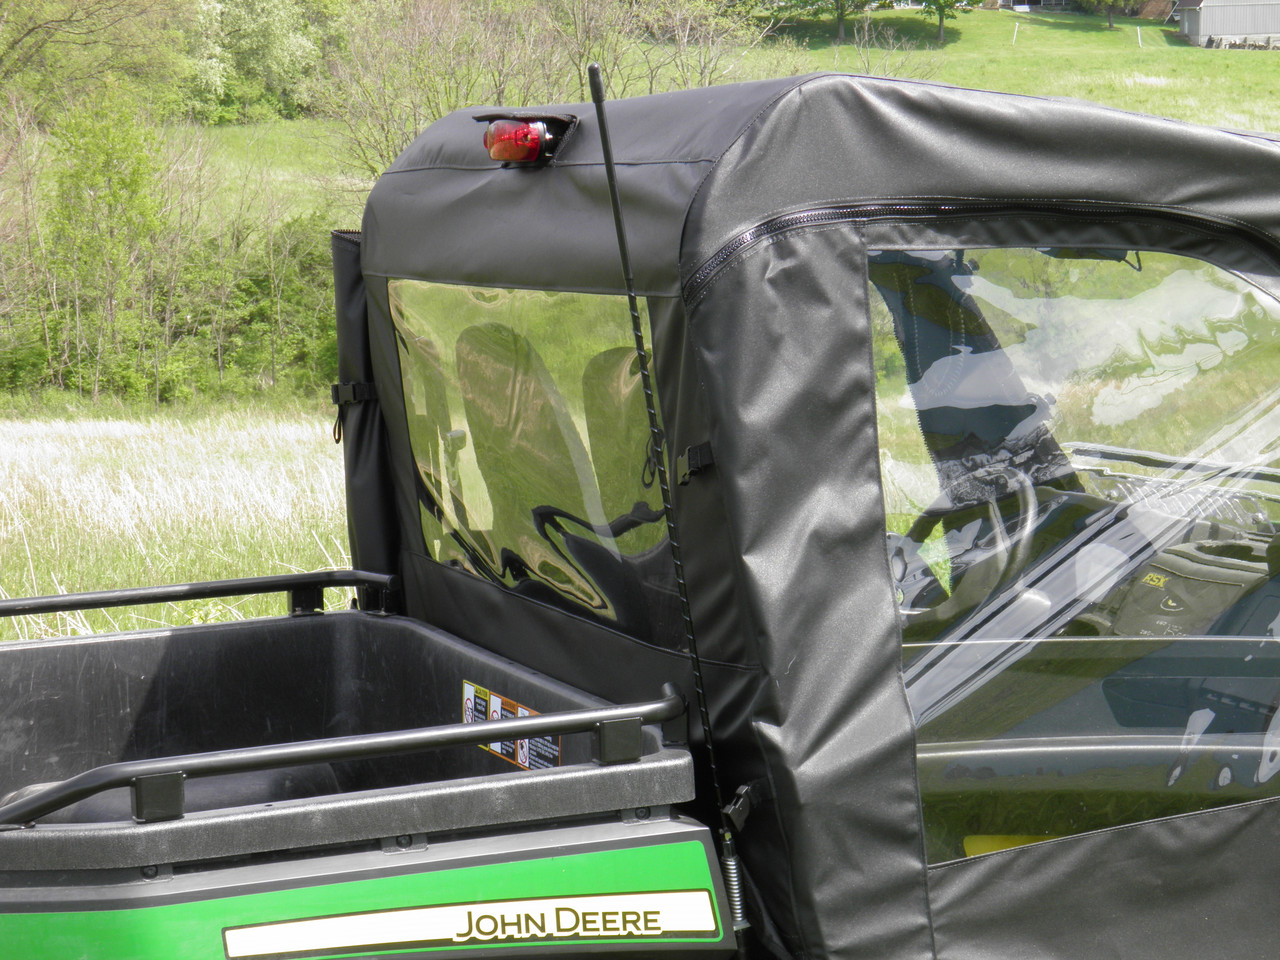 John Deere Gator RSX 850/860 Full Cab Enclosure for Hard Windshield rear and side angle view close up